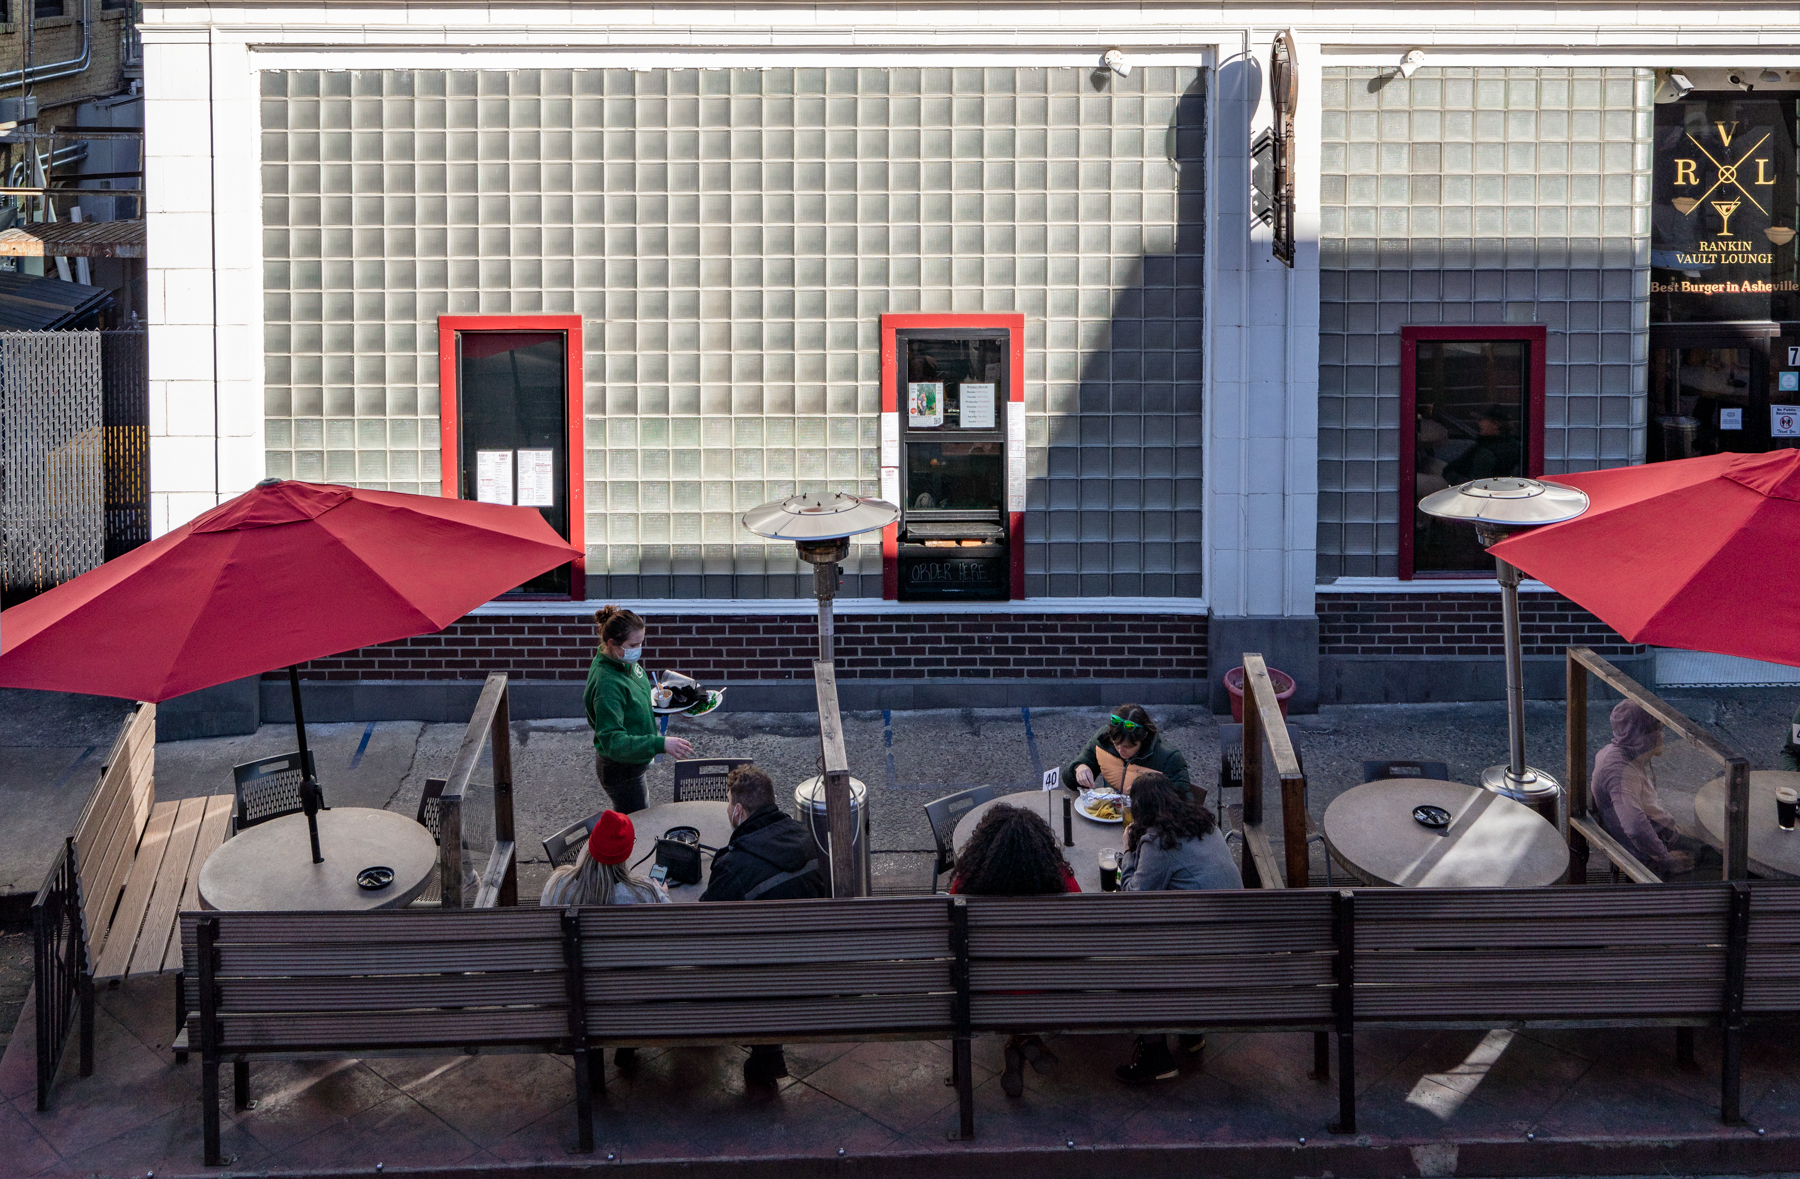 a photo of the outdoor patio of the Rankin Vault Cocktail Lounge. A server in a green shirt holds two dirty plates and approaches a table. Three of the round tables have people in them. There are red umbrellas over most of the tables.